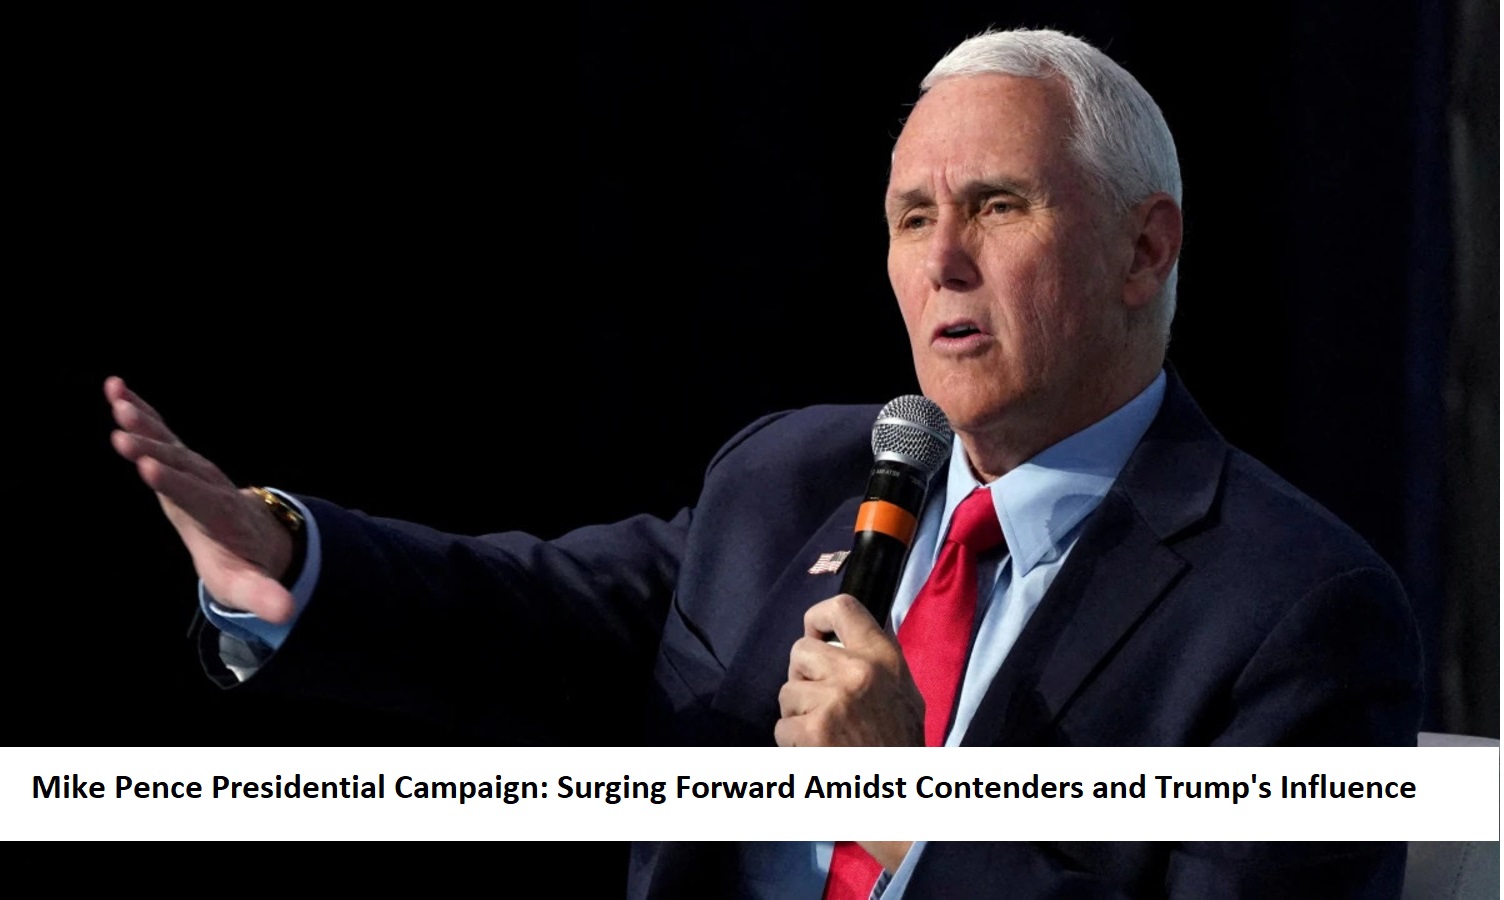 Mike Pence Presidential Campaign Surging Forward Amidst Contenders and Trump's Influence